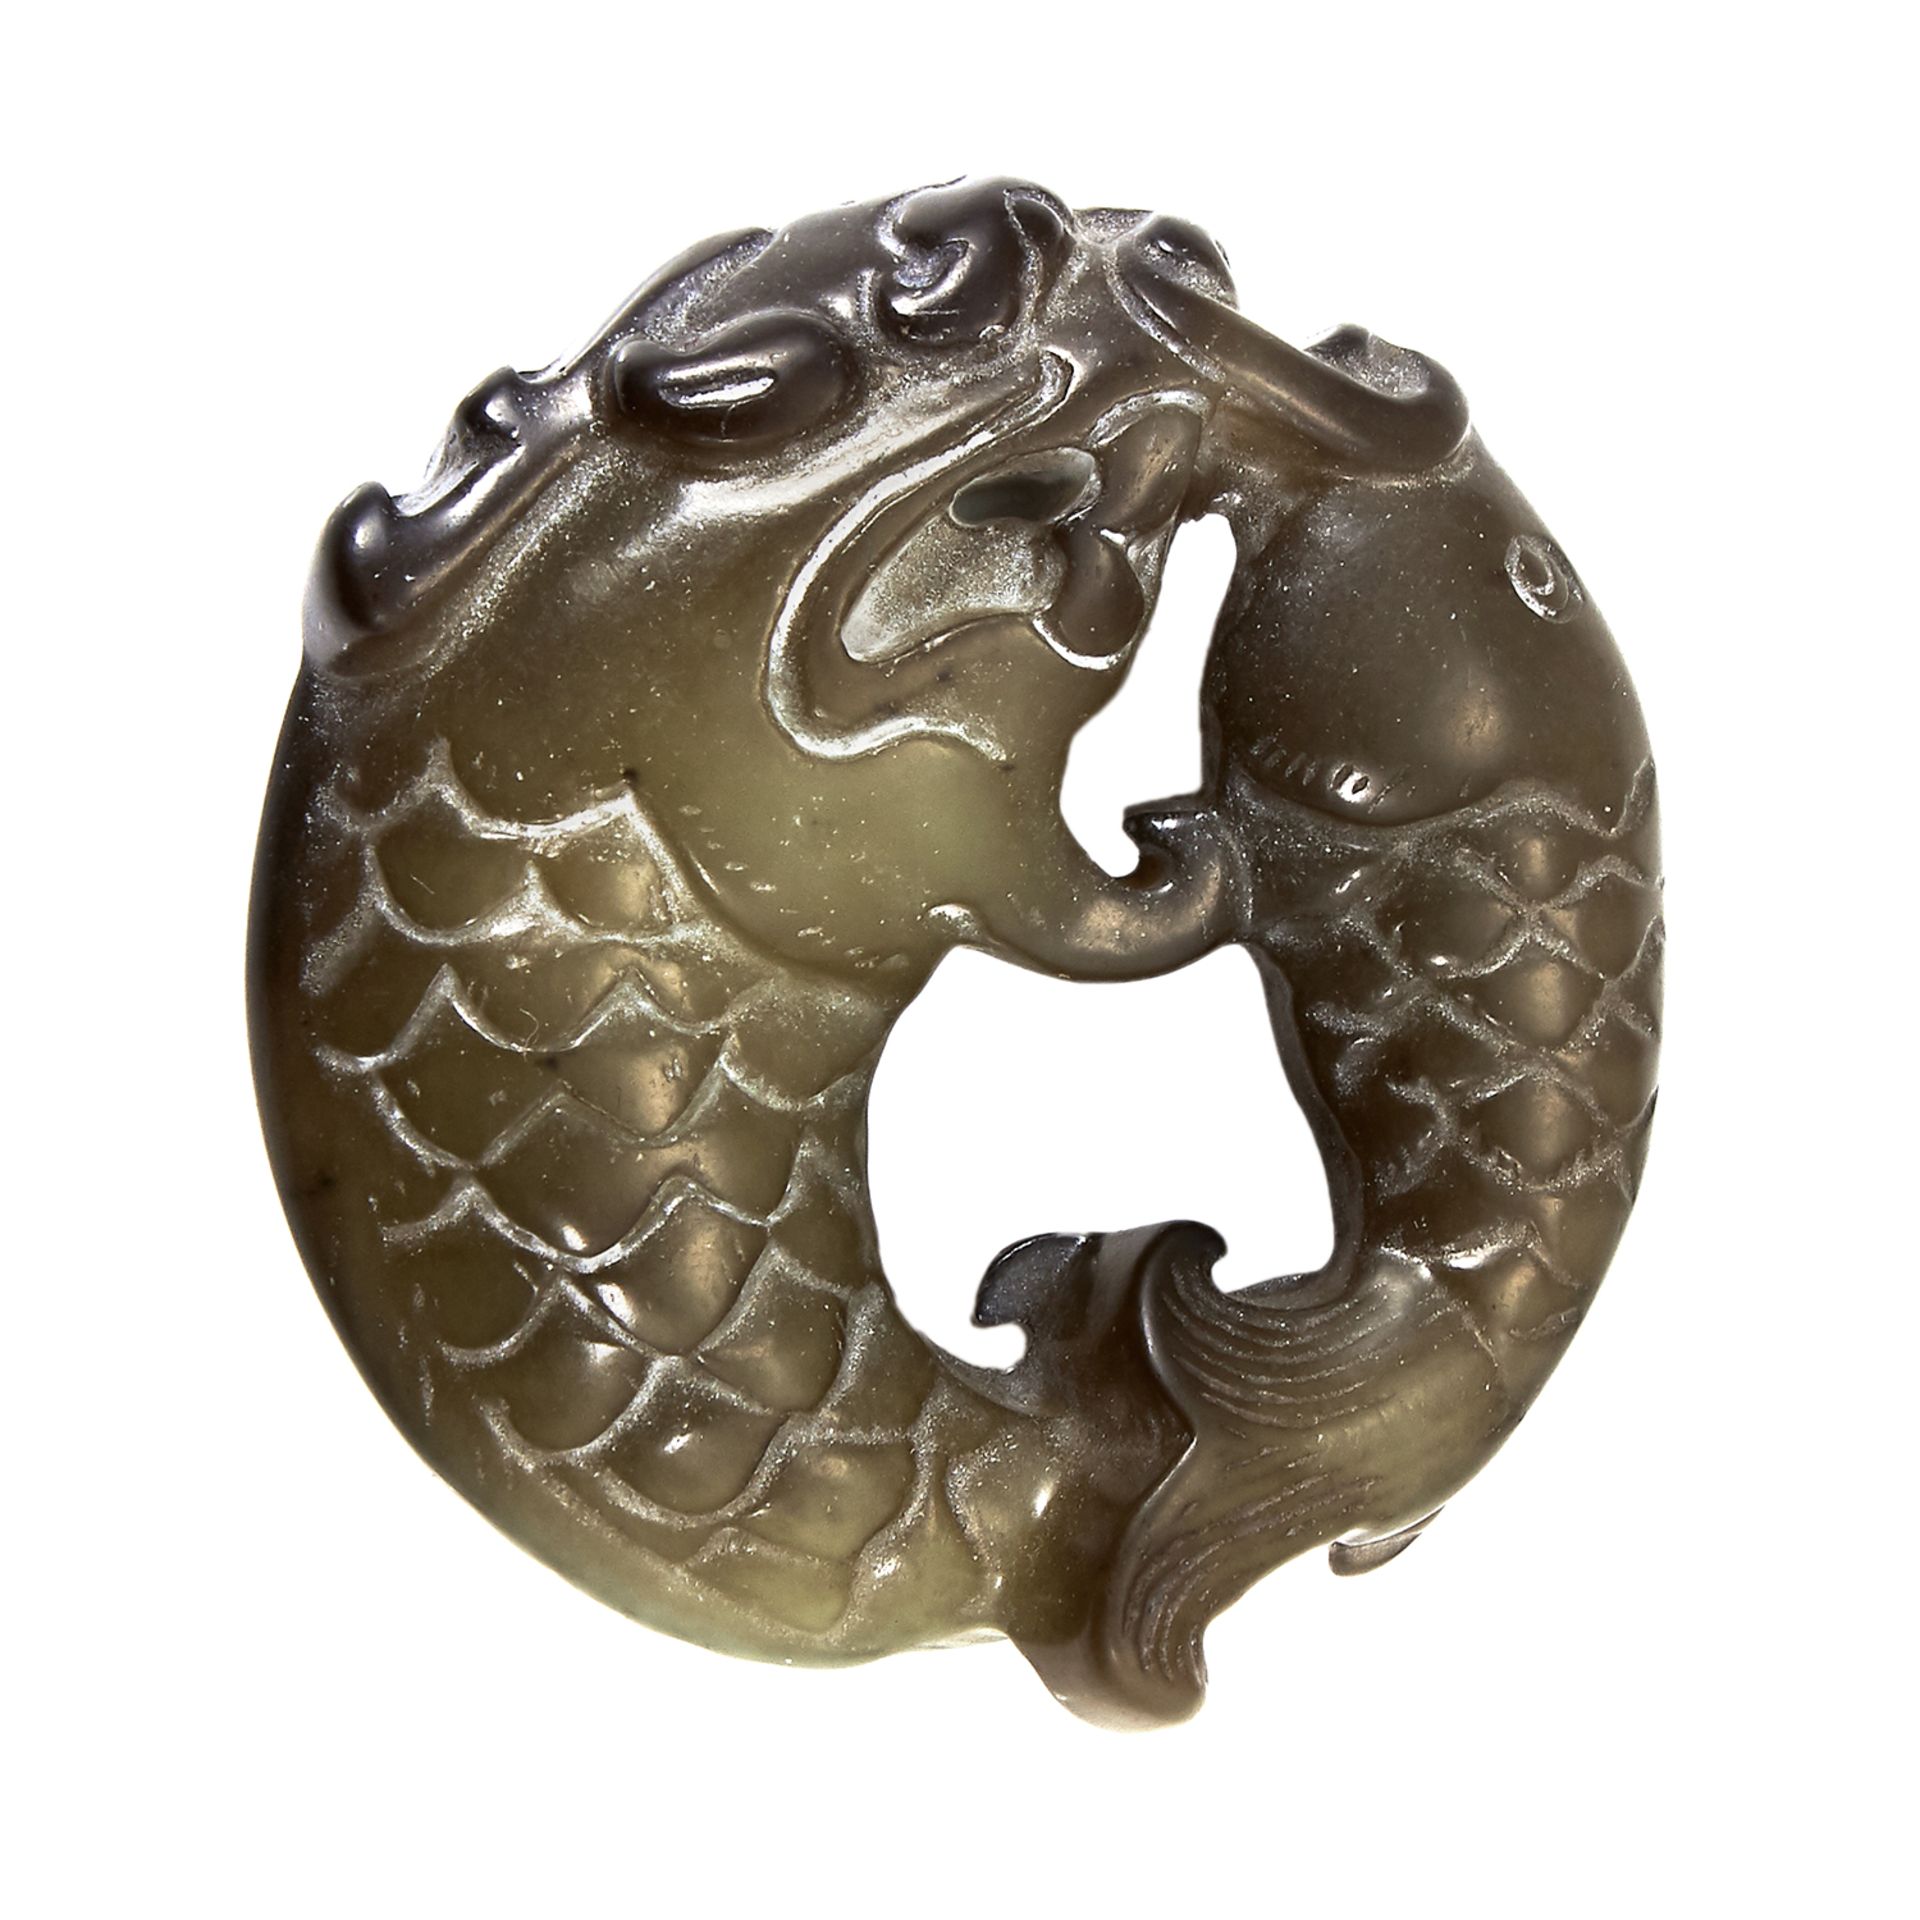 A CHINESE JADE FISH PLAQUE of circular form, carved depicting two fish swimming around one